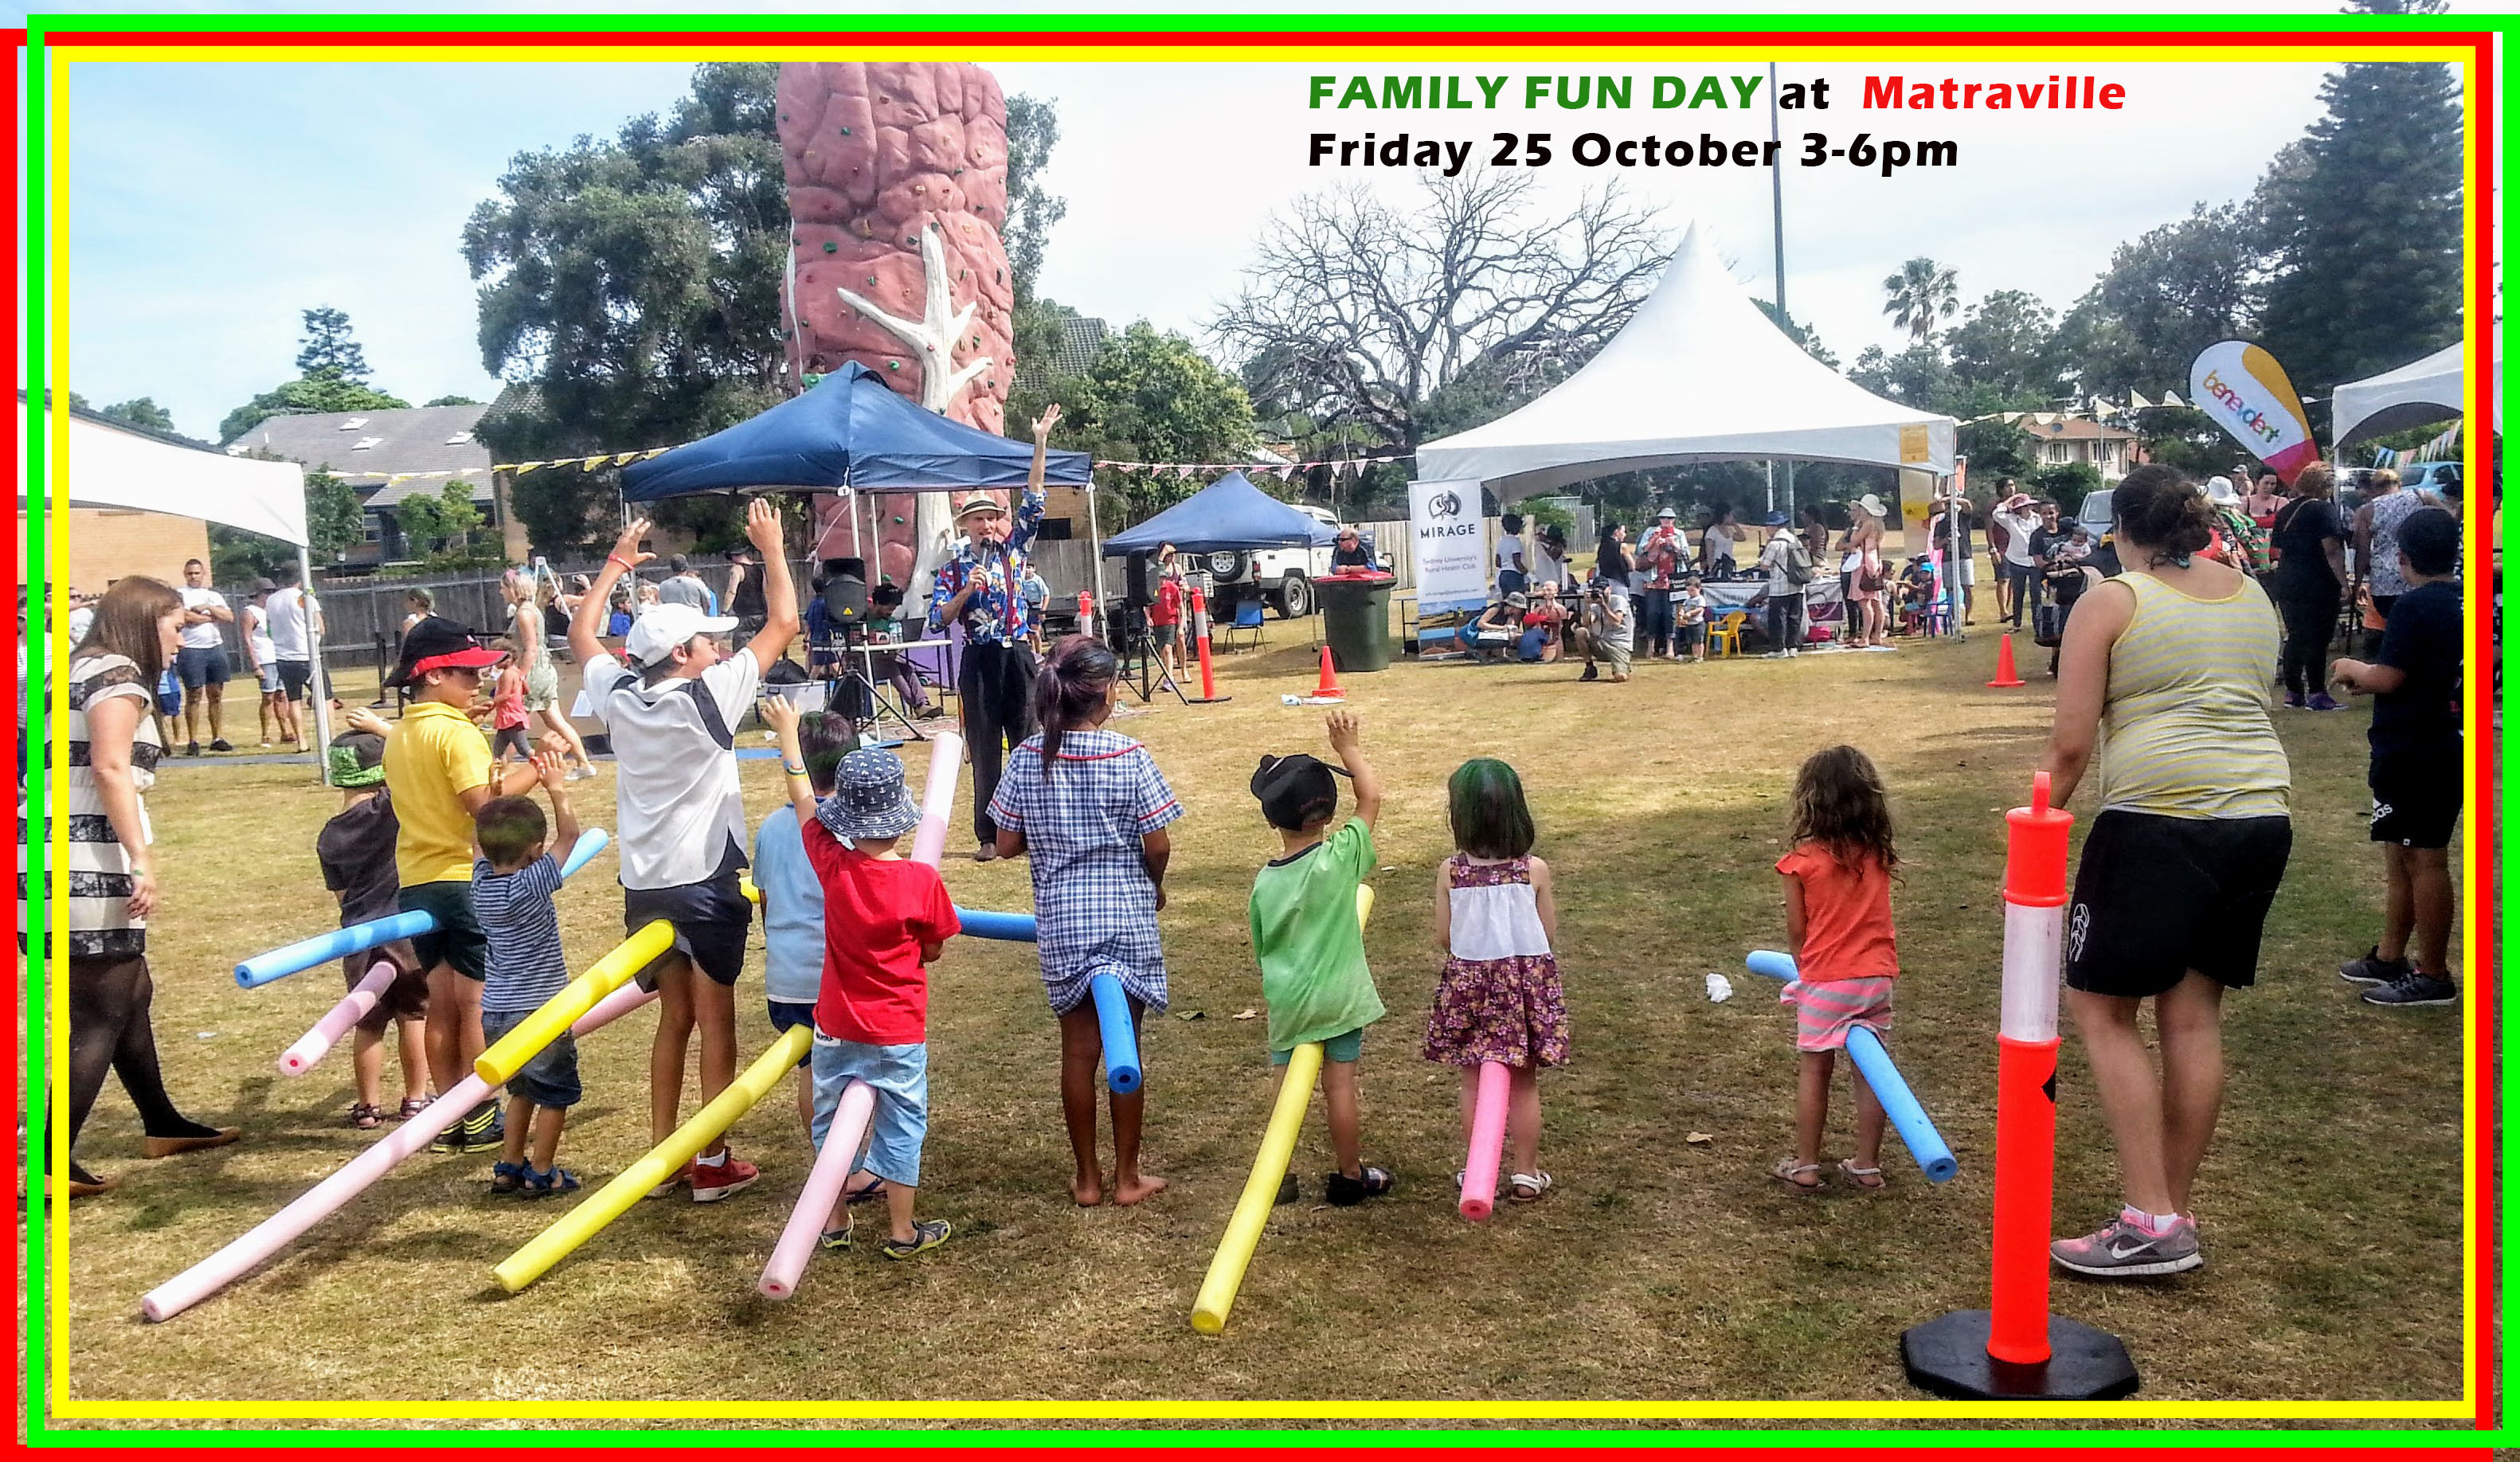 poster for family fun day at Matraville 2019 showing children setting off to race on noodles